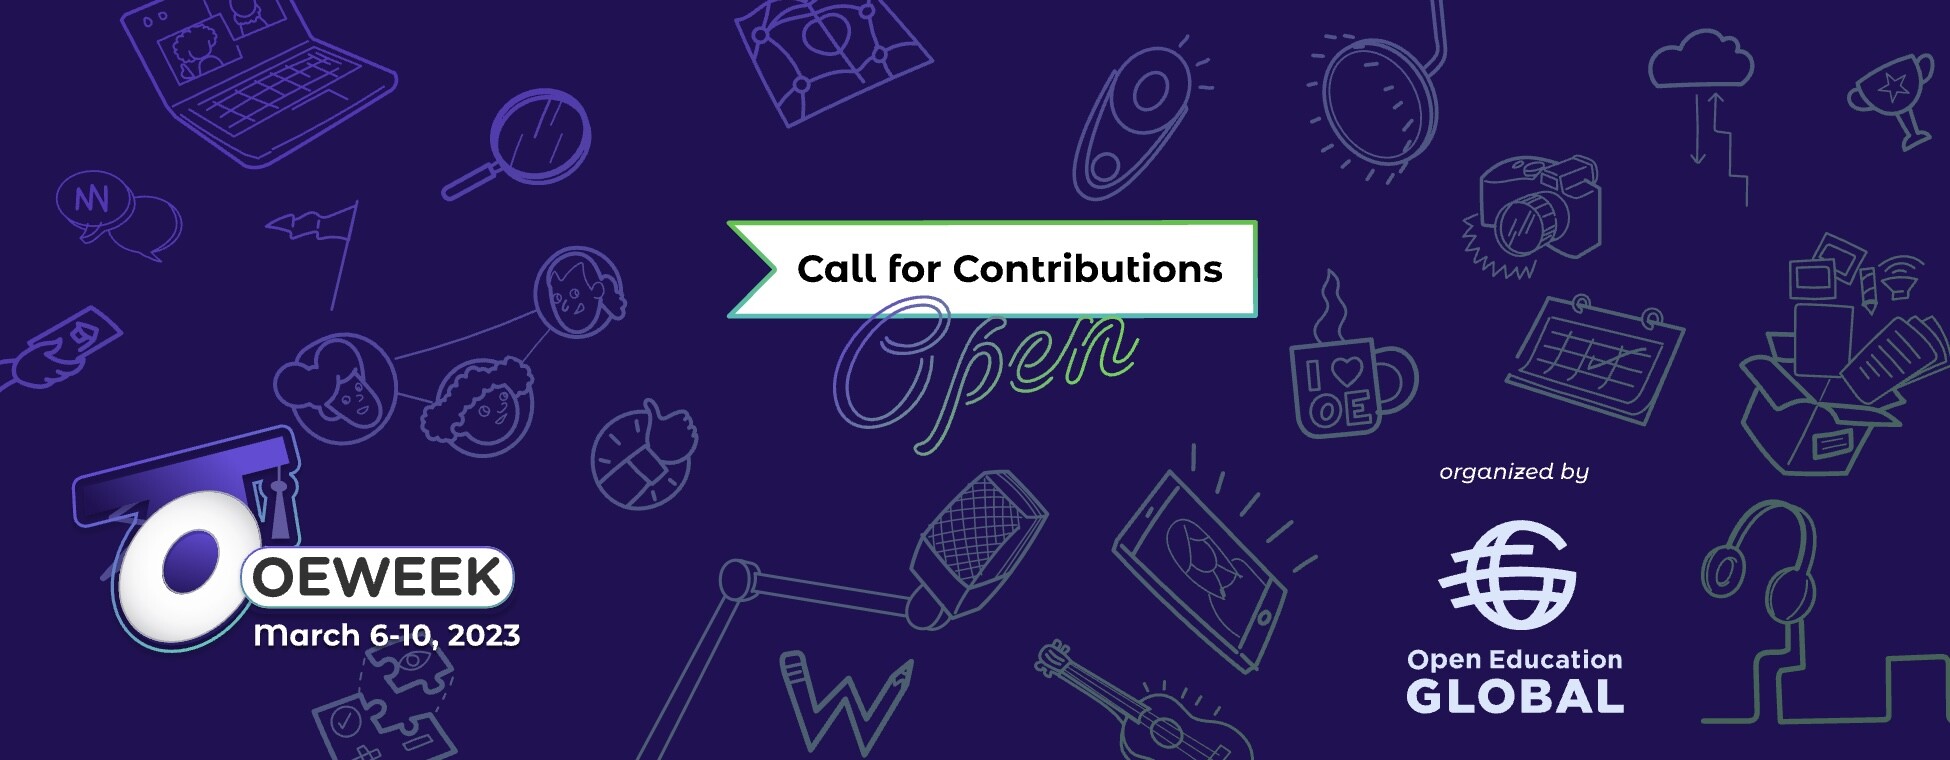 OEWeek is March 6-10, 2023, organized by Open Education Global. The Call for Contribution remains open!